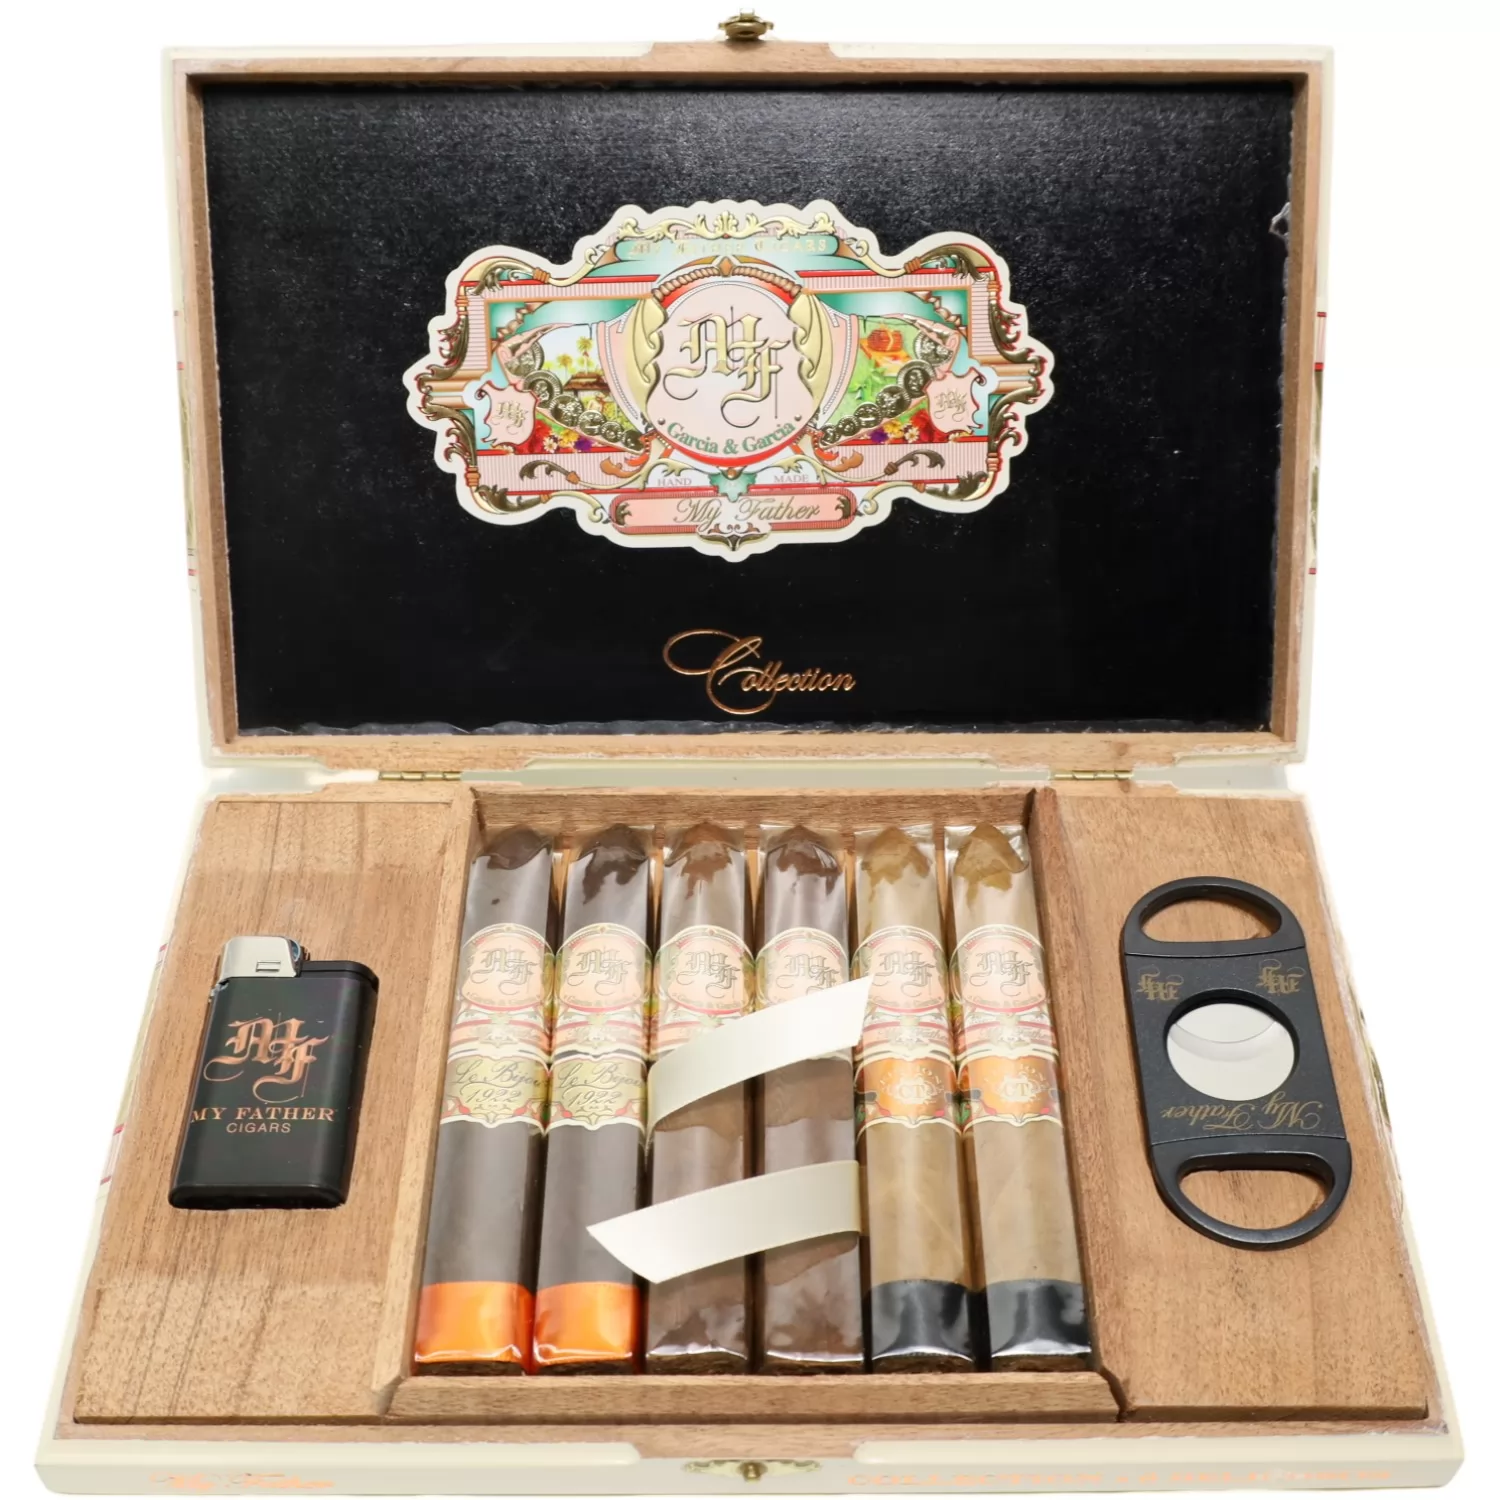 My Father Selection Belicoso 6-CT Sampler